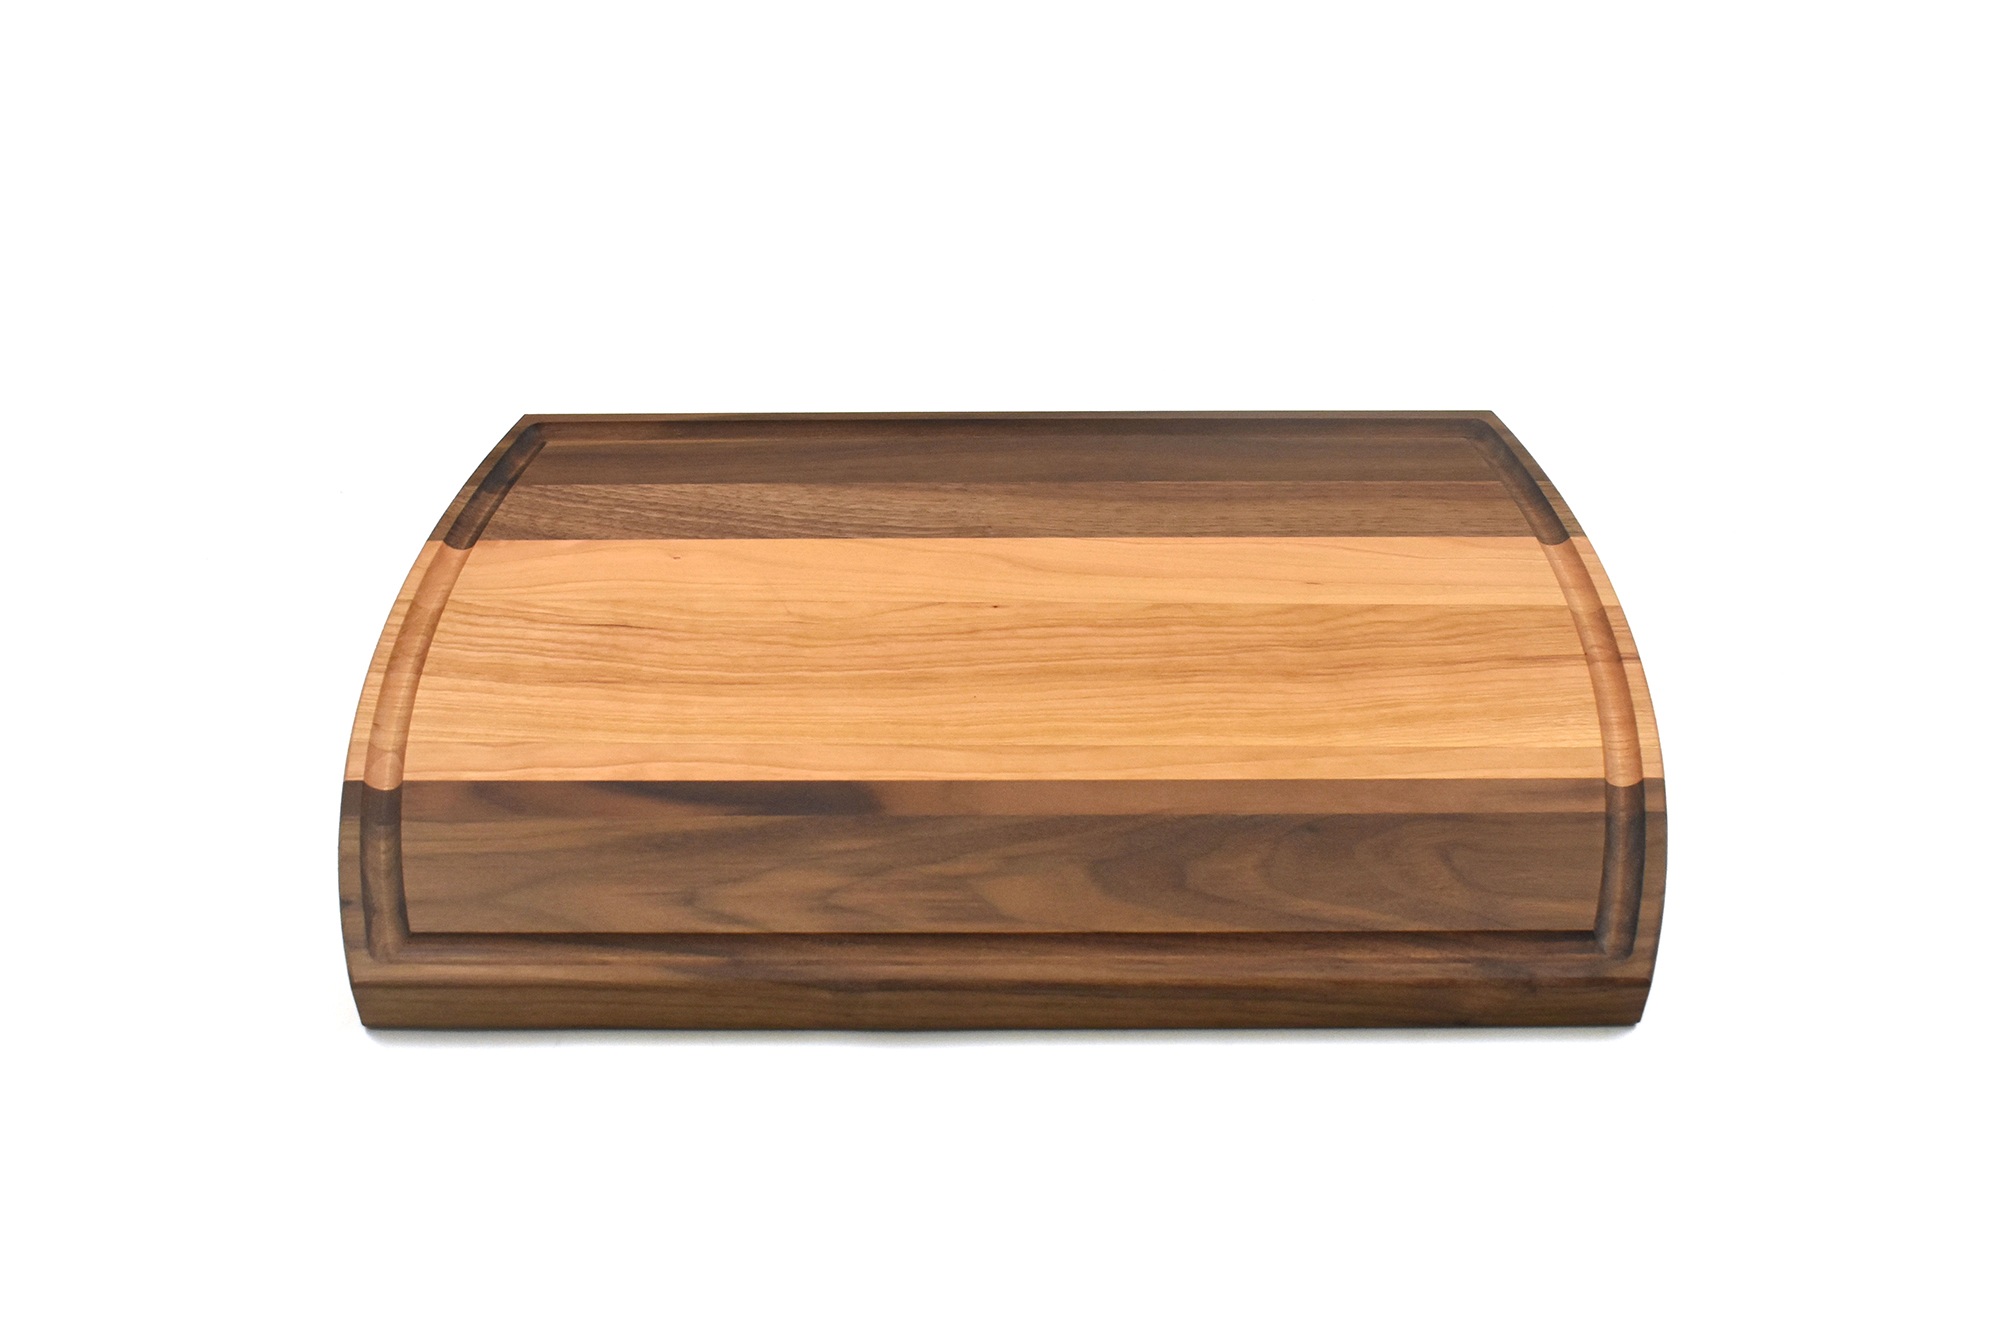 Large arched multi wood species cutting board with cherry in the middle